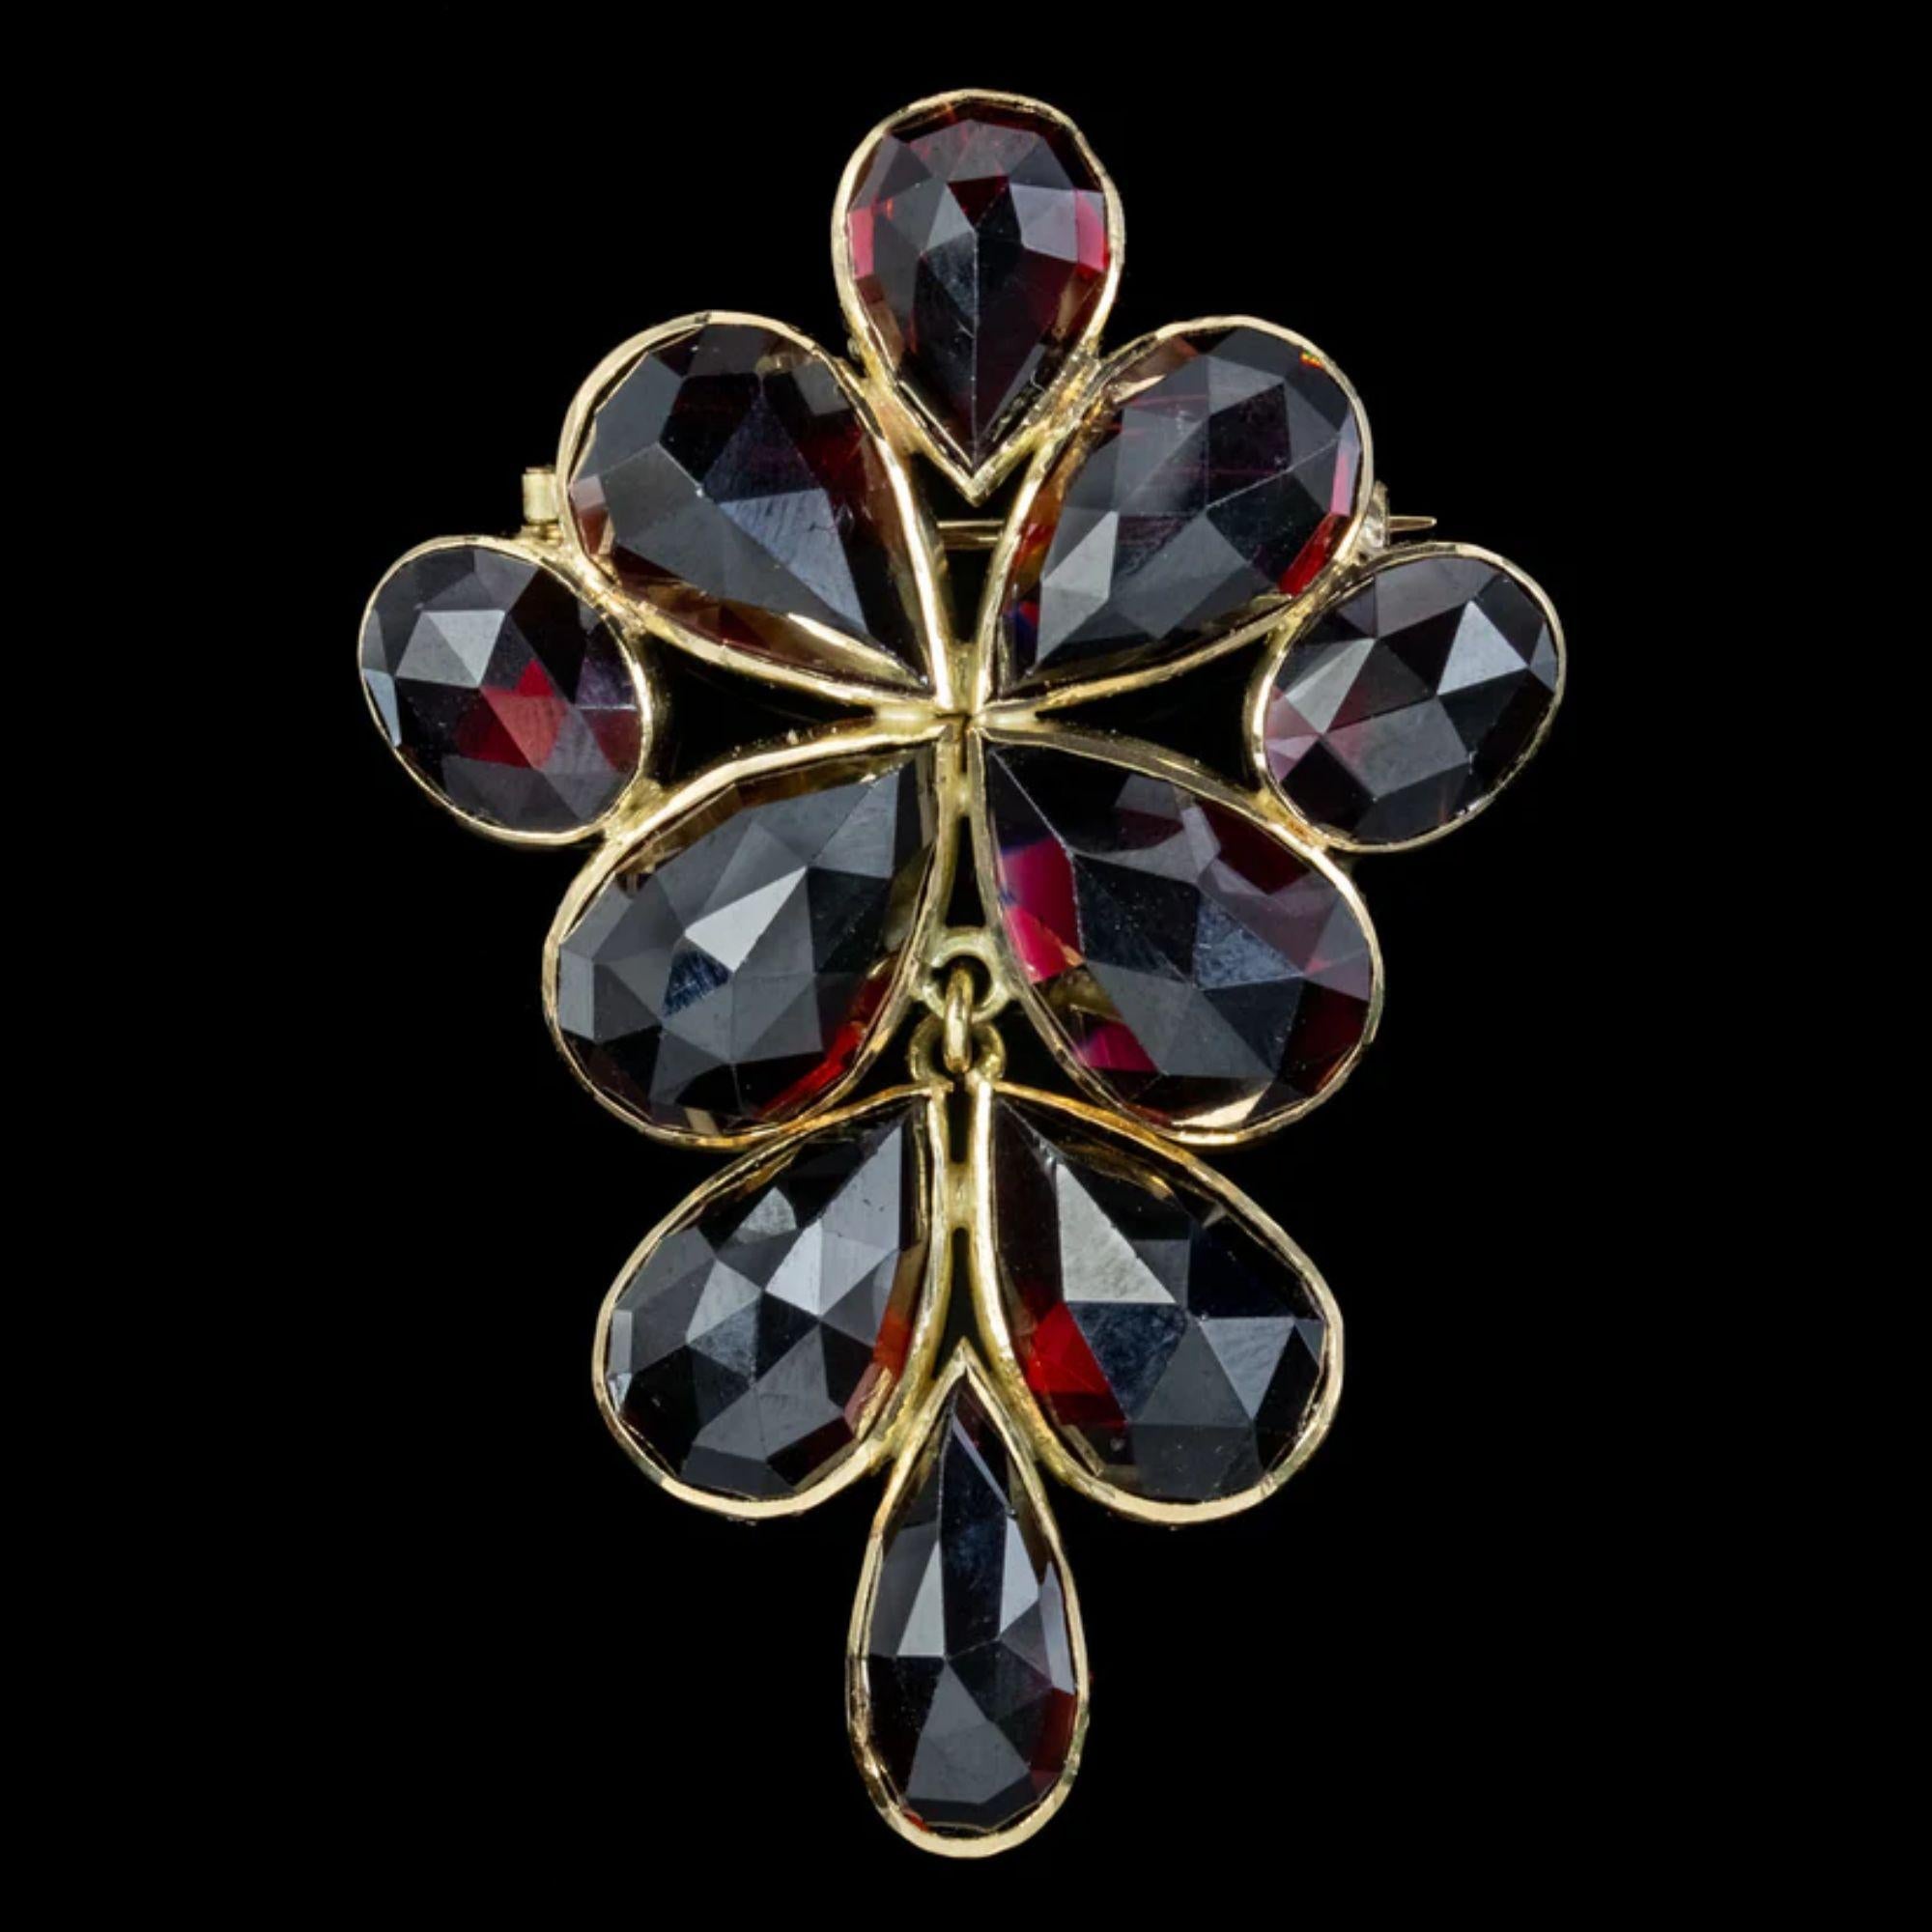 A remarkable vintage brooch adorned with ten briolette cut almandine garnets that display a blazing cherry-red fire beneath their dark surface. The stones range from 3ct to 6ct and glisten with many expertly cut, triangular facets. 

The 14ct gold